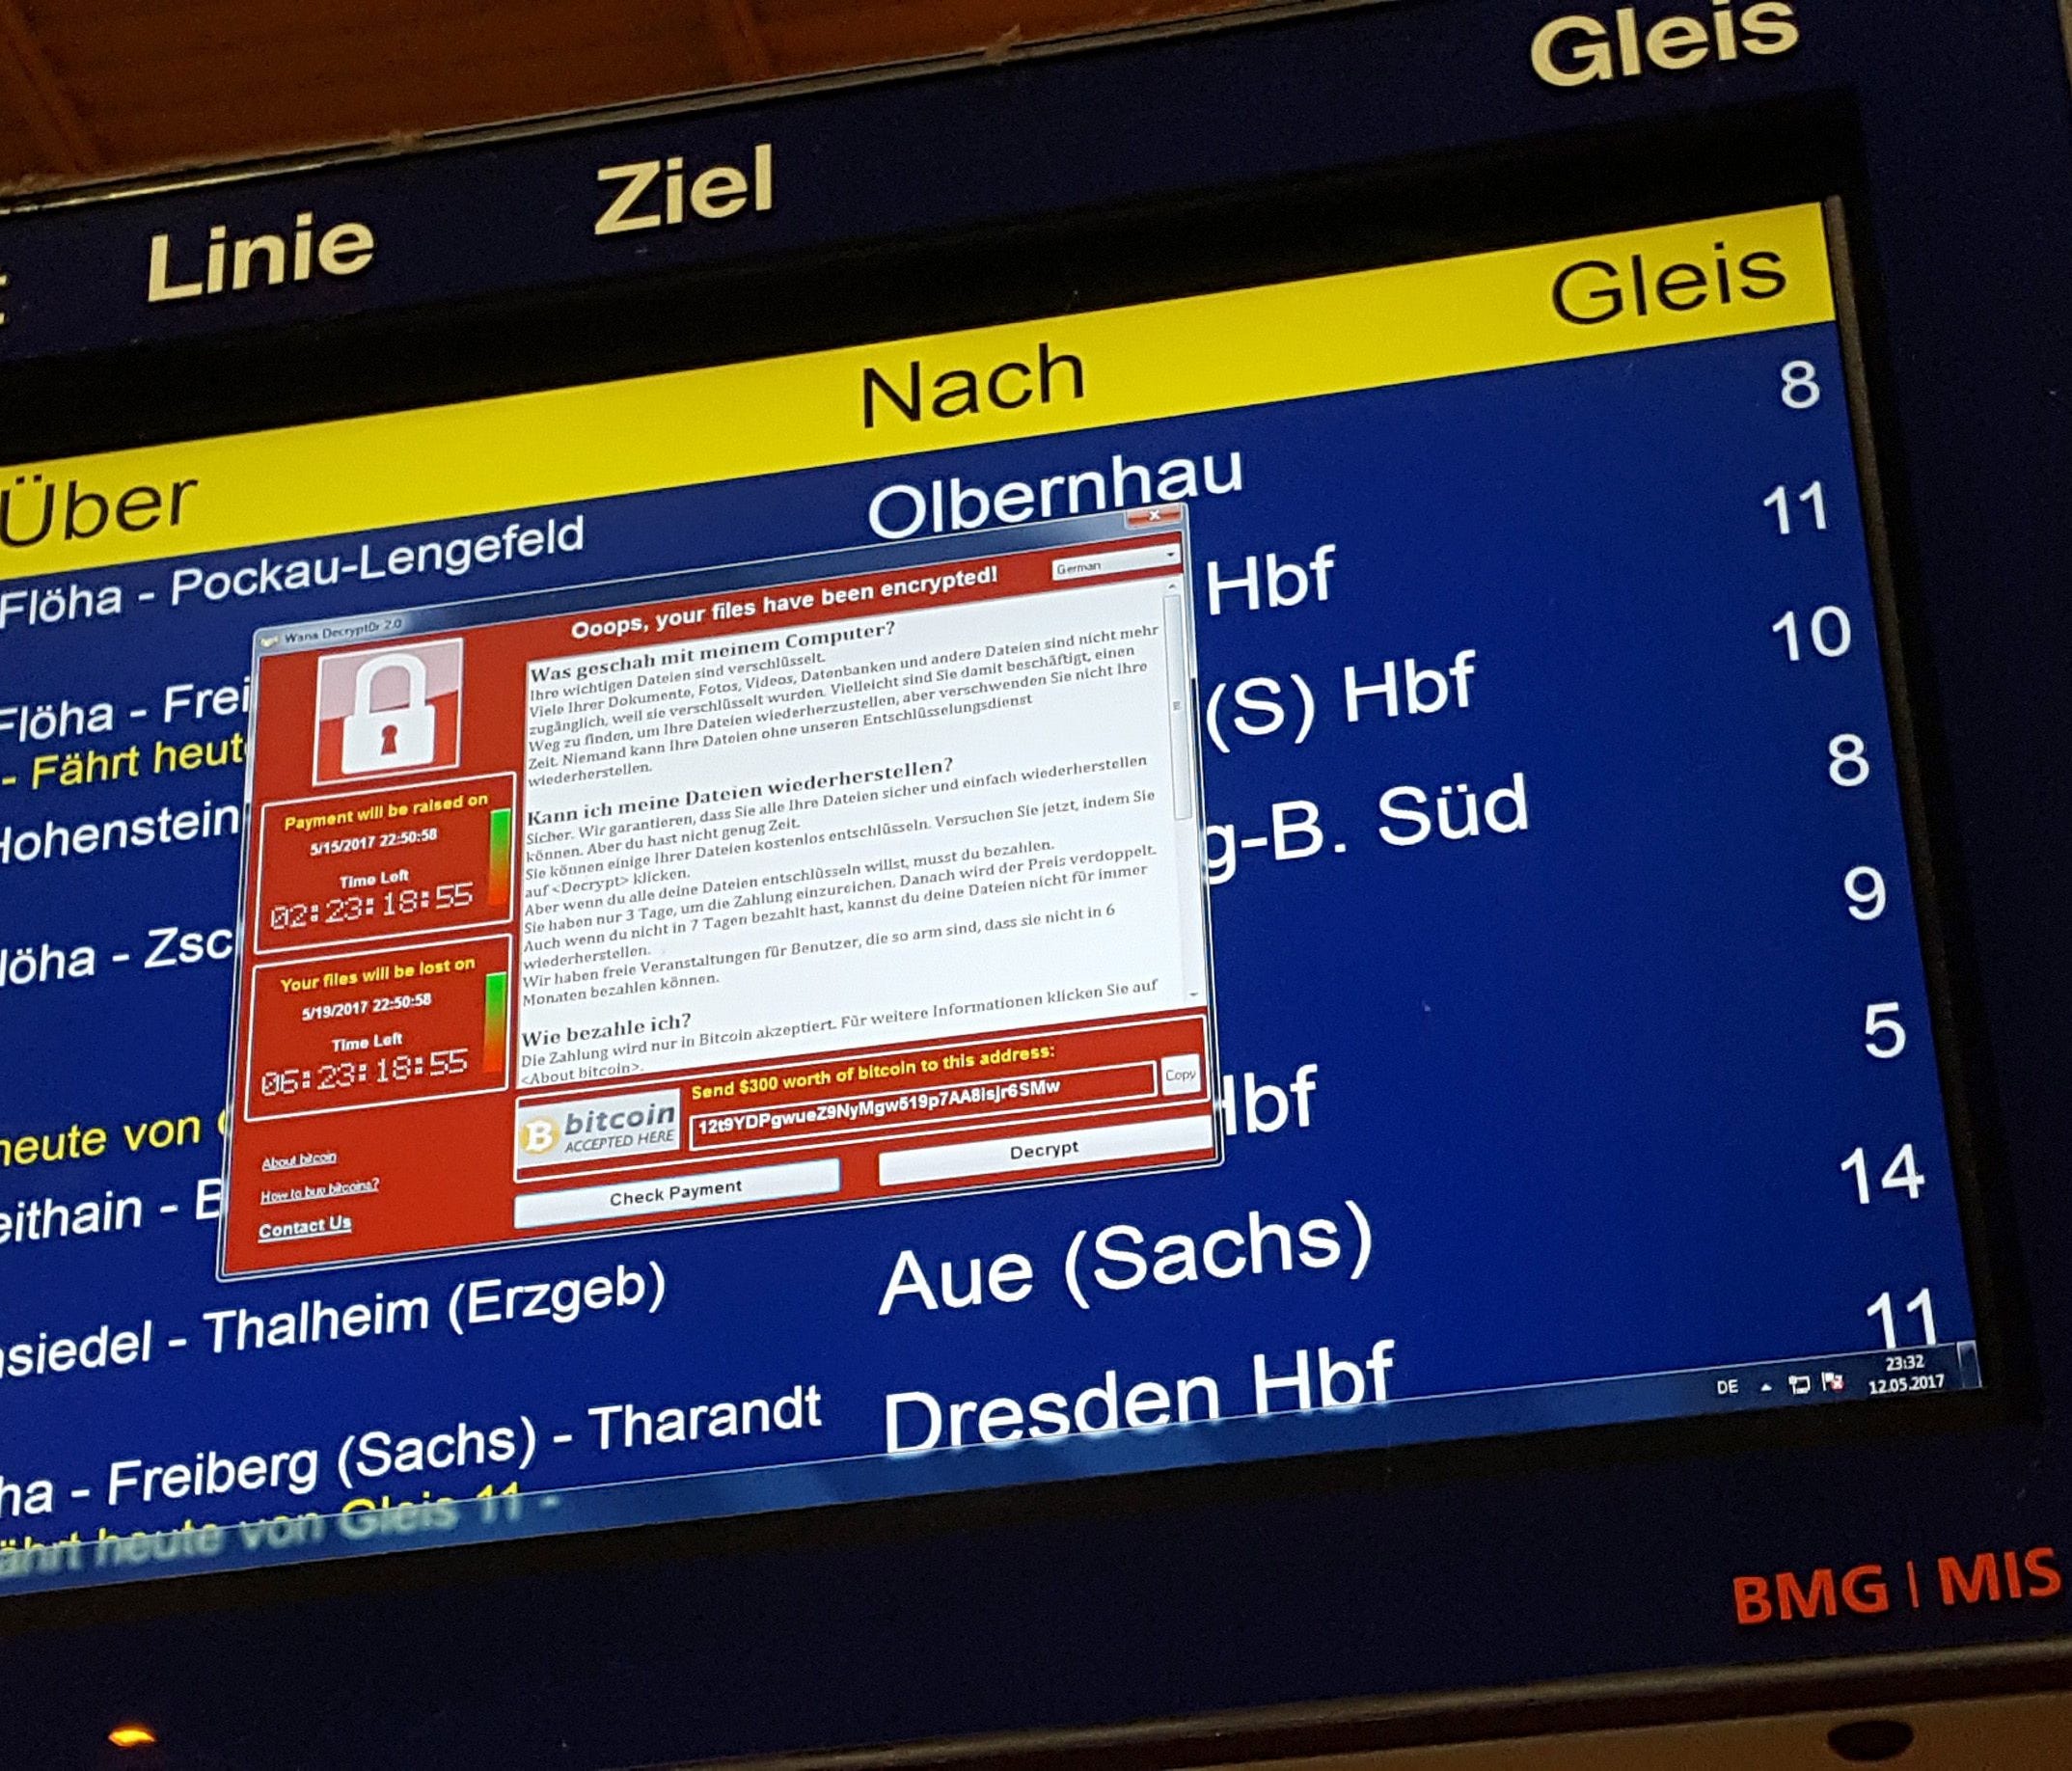 A window announcing the encryption of data including a requirement to pay appears on an electronic timetable display at the railway station in Chemnitz, eastern Germany, on May 12, 2017.  A fast-moving wave of cyberattacks swept the globe, apparently 